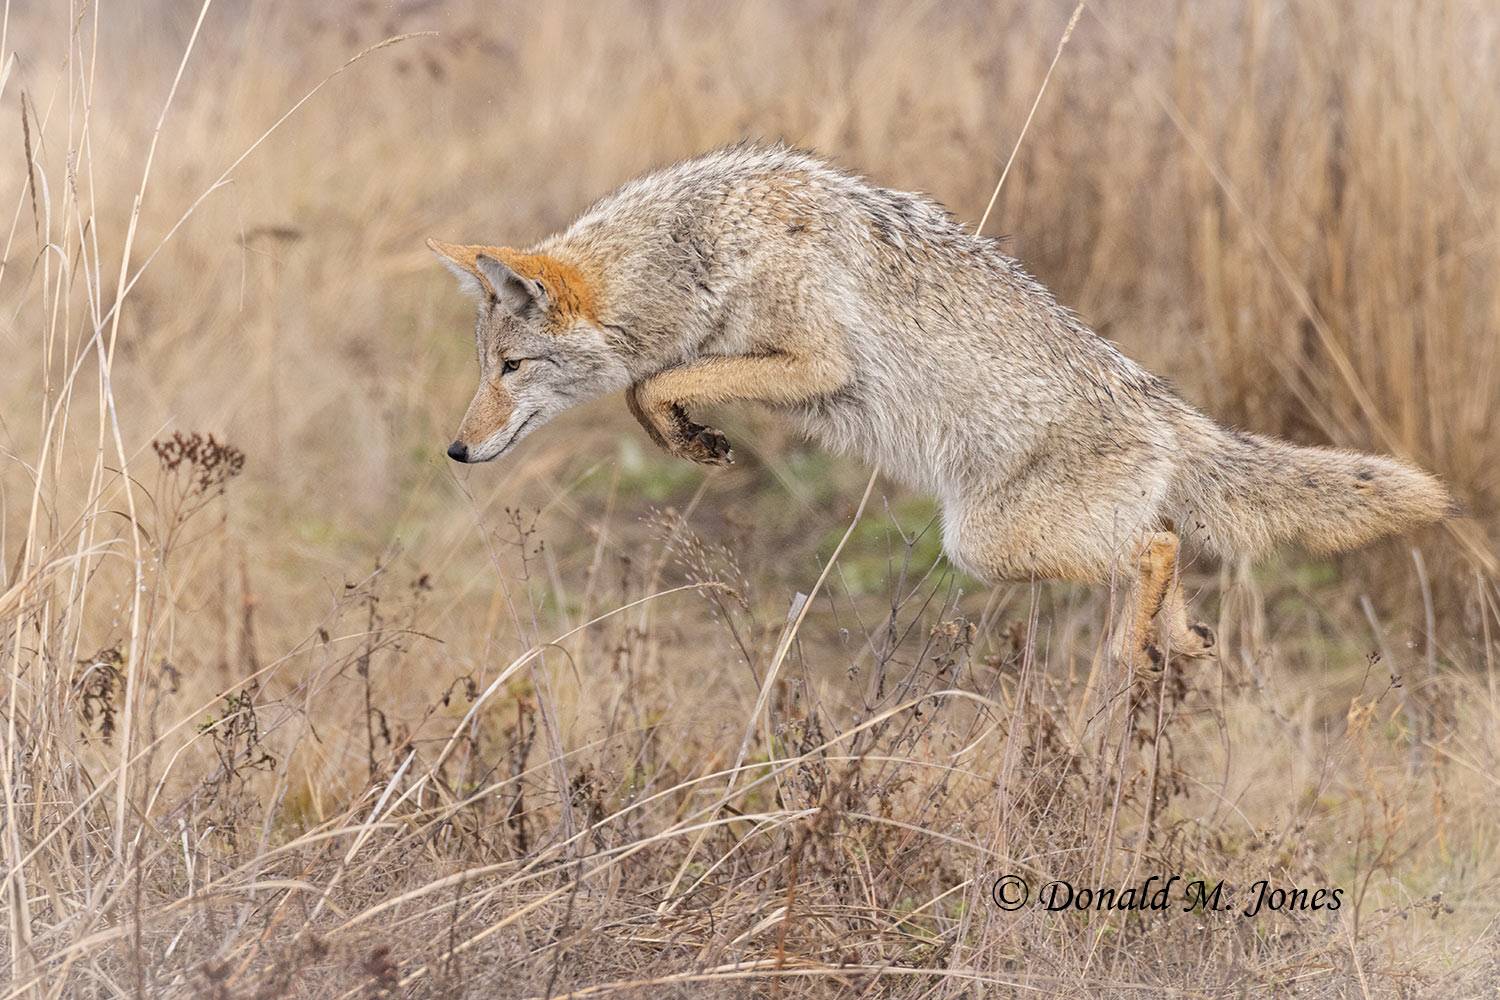 Coyote mousing